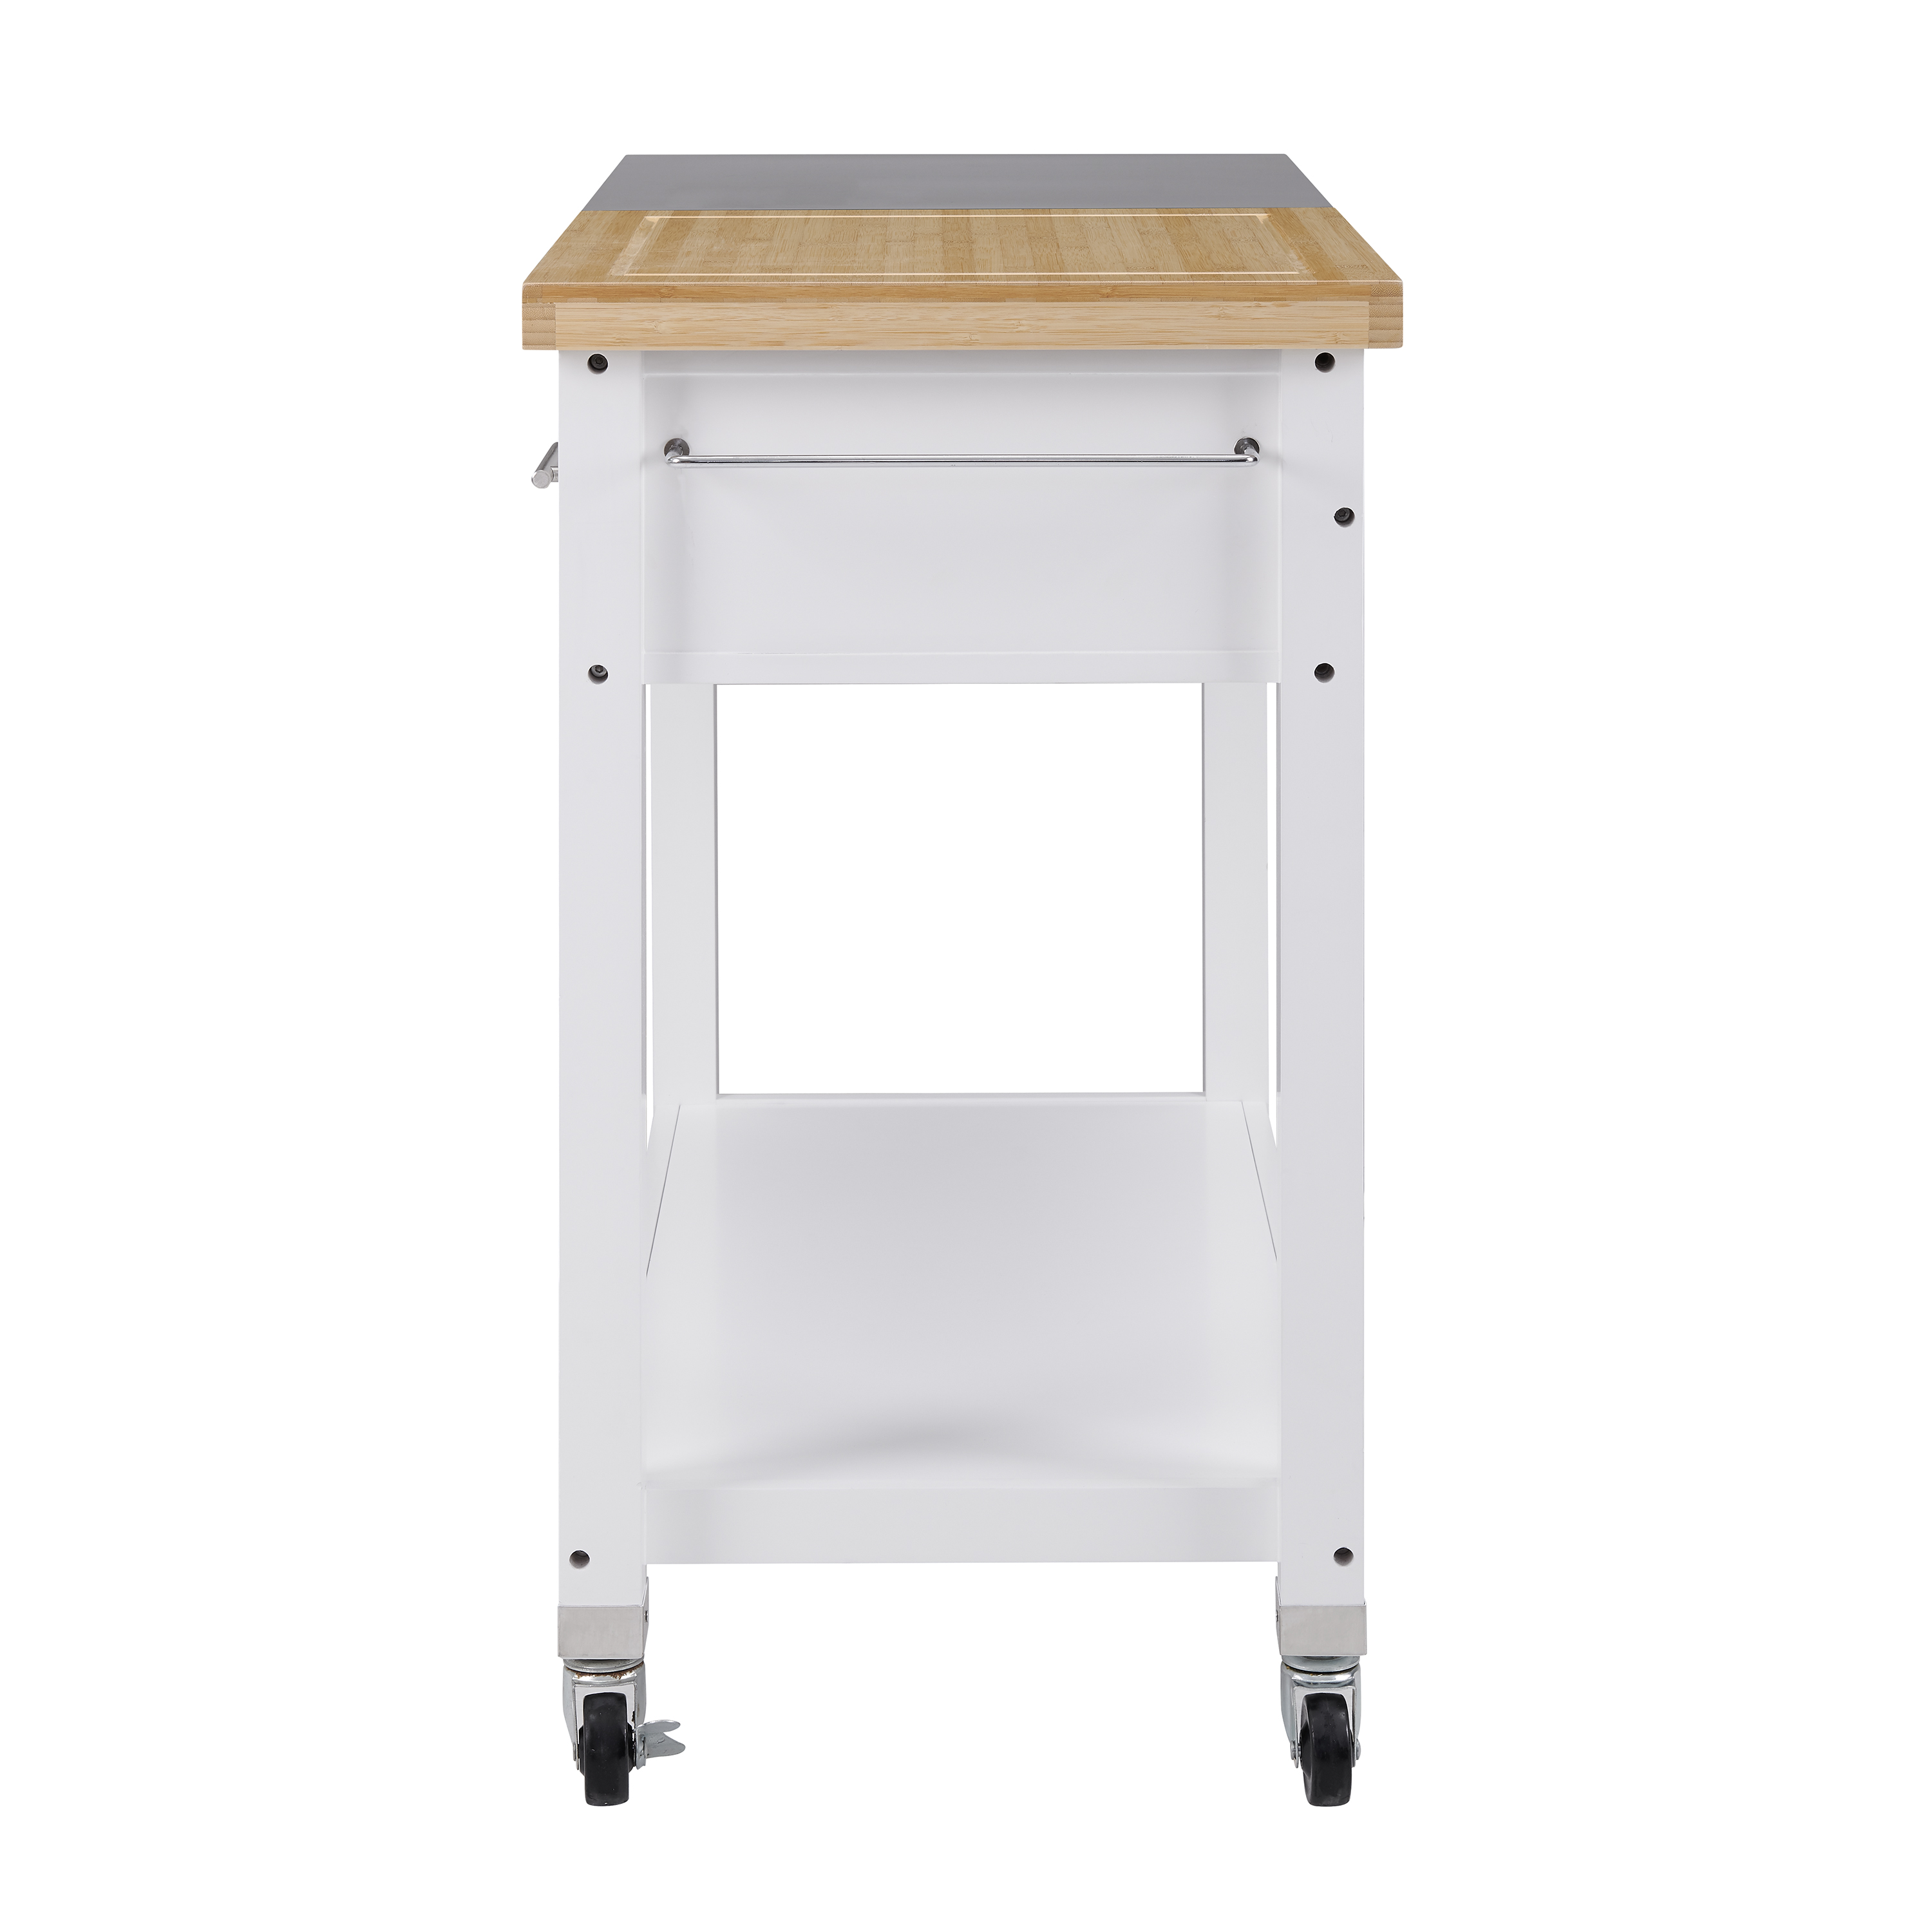 Better Homes & Gardens Maxwell Kitchen Cart, White/Brown - image 5 of 11